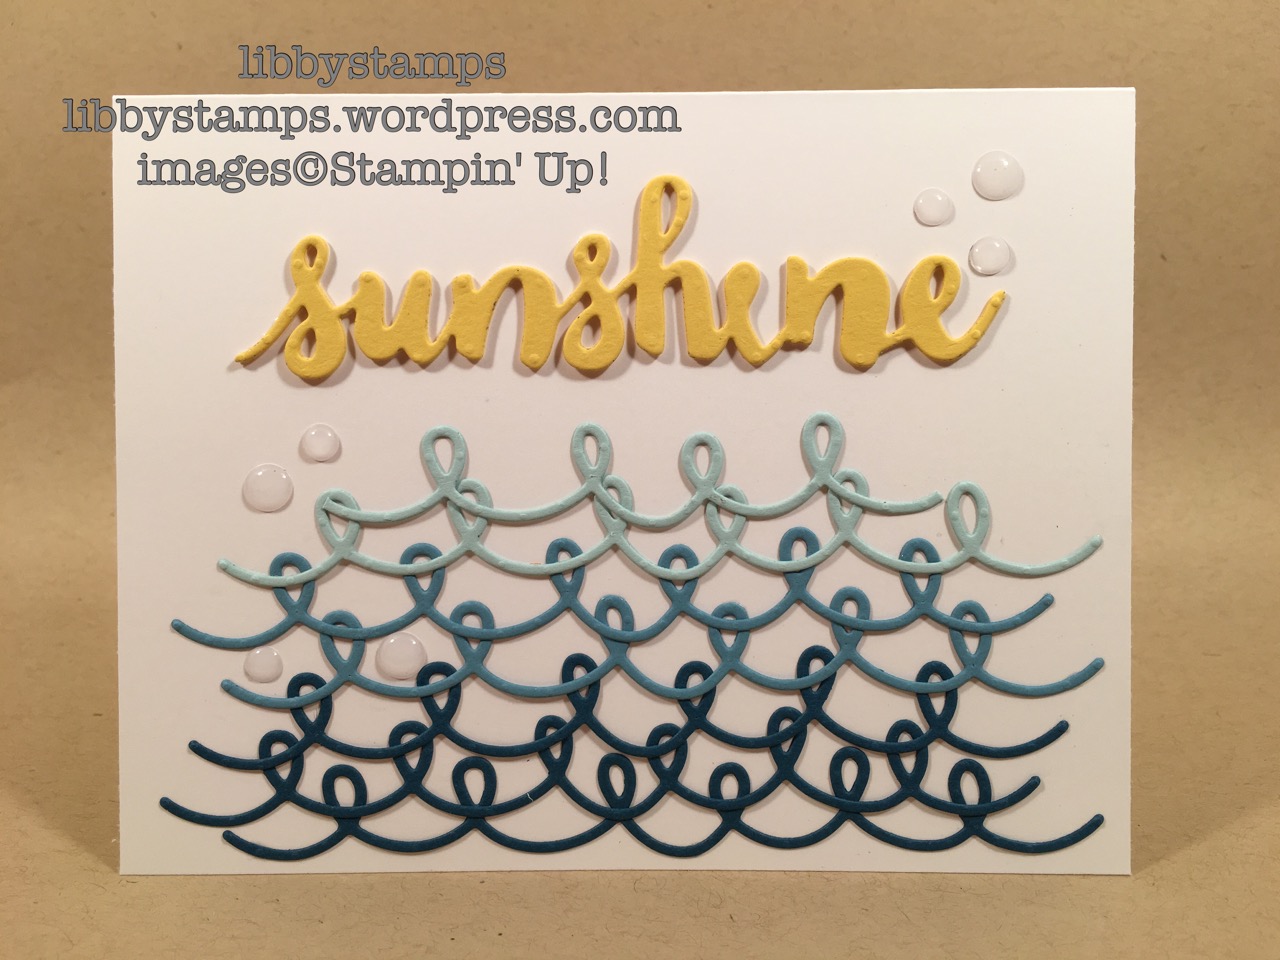 libbystamps, stampin up, Sunshine Wishes Thinlits, Cupcake Cutouts Framelits, PCC209, White Perfect Accents, water theme, no stamping card